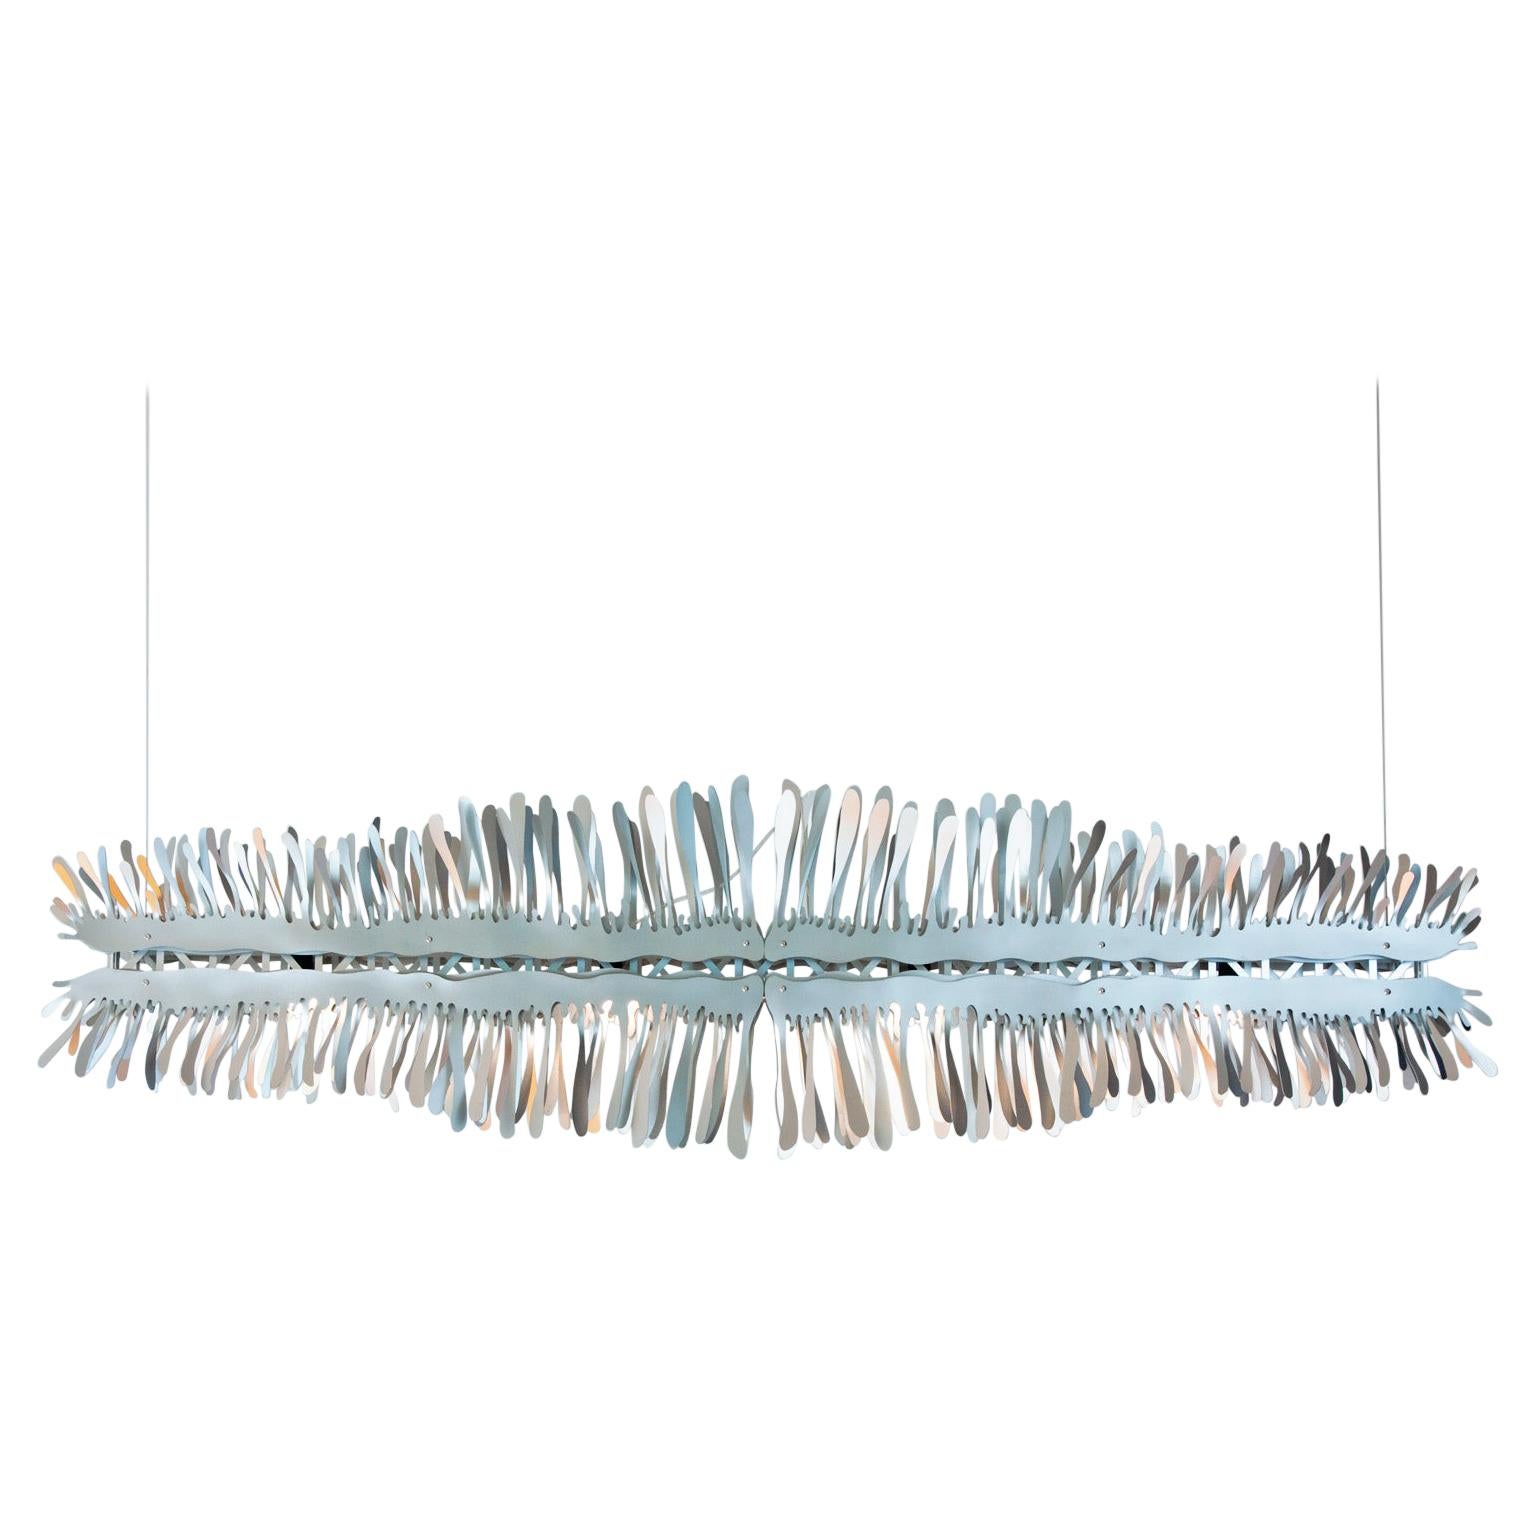 Liquid 48” Linear Chandelier in Stainless Steel by David D’Imperio For Sale